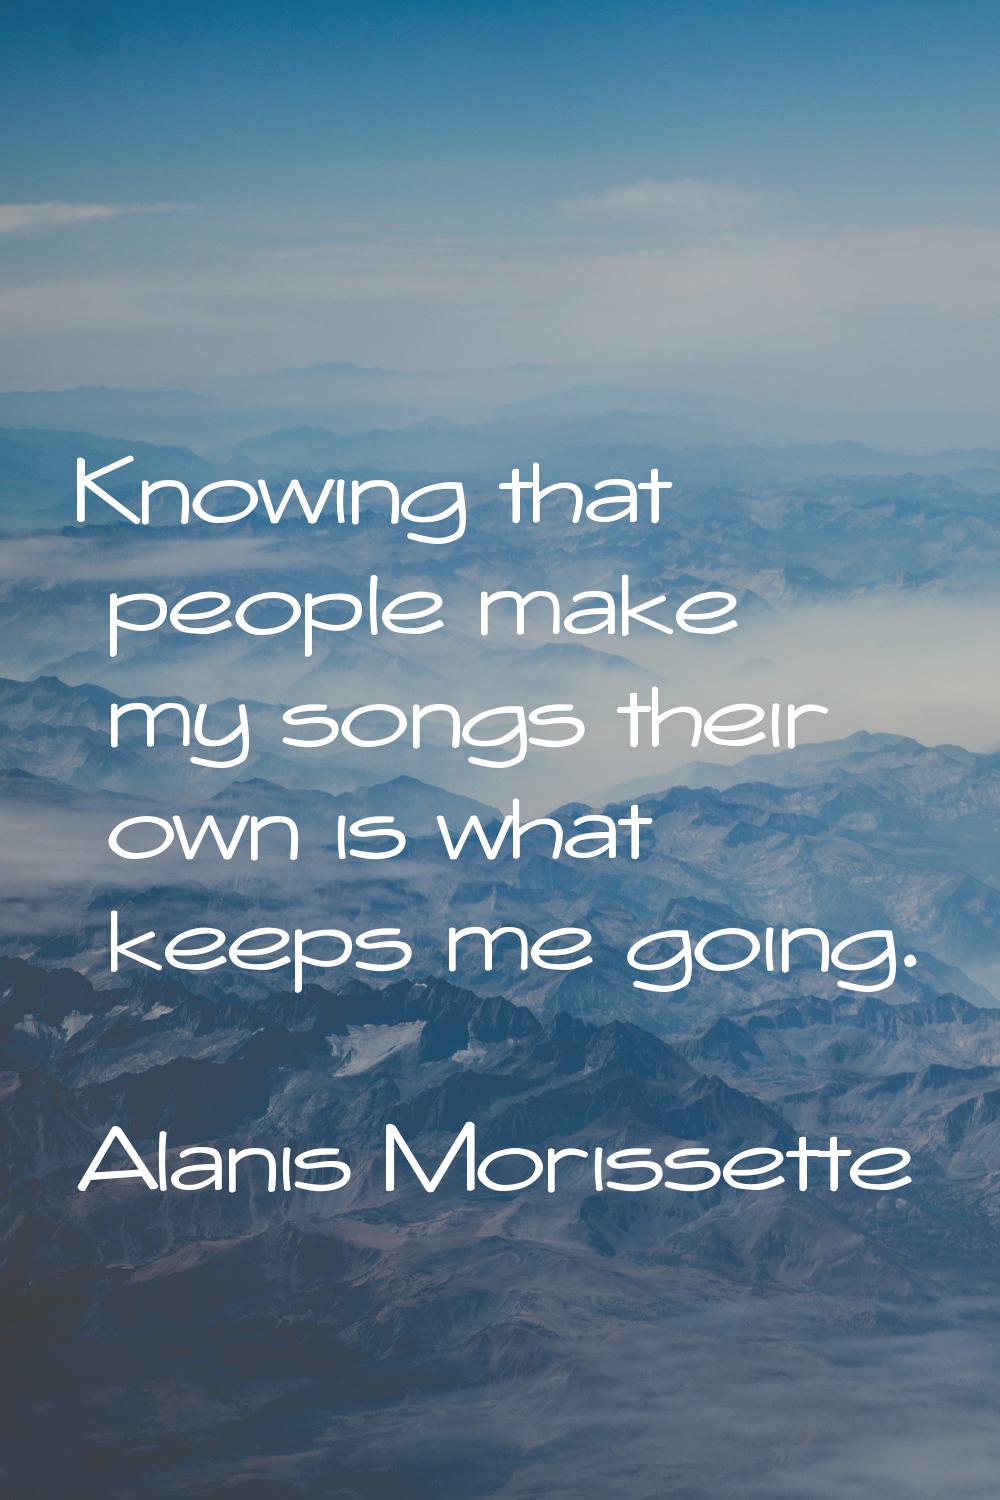 Knowing that people make my songs their own is what keeps me going.